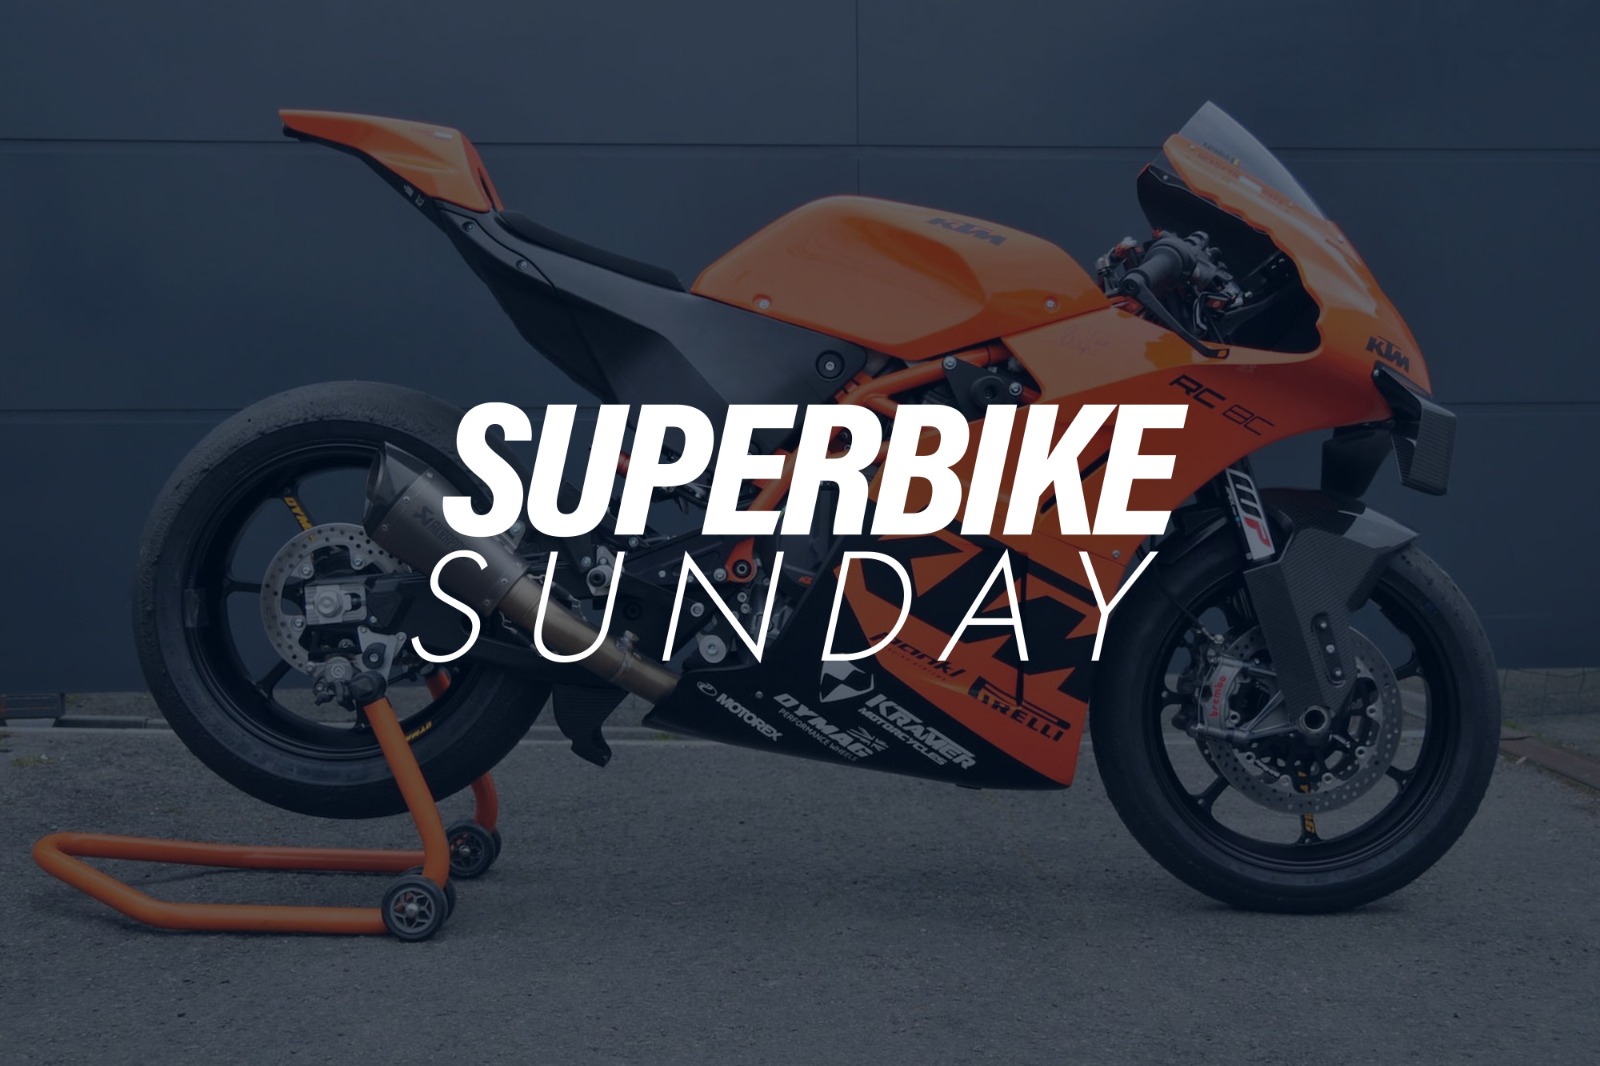 A view of the super bike Sunday event that will be happening from April 17 to 24th